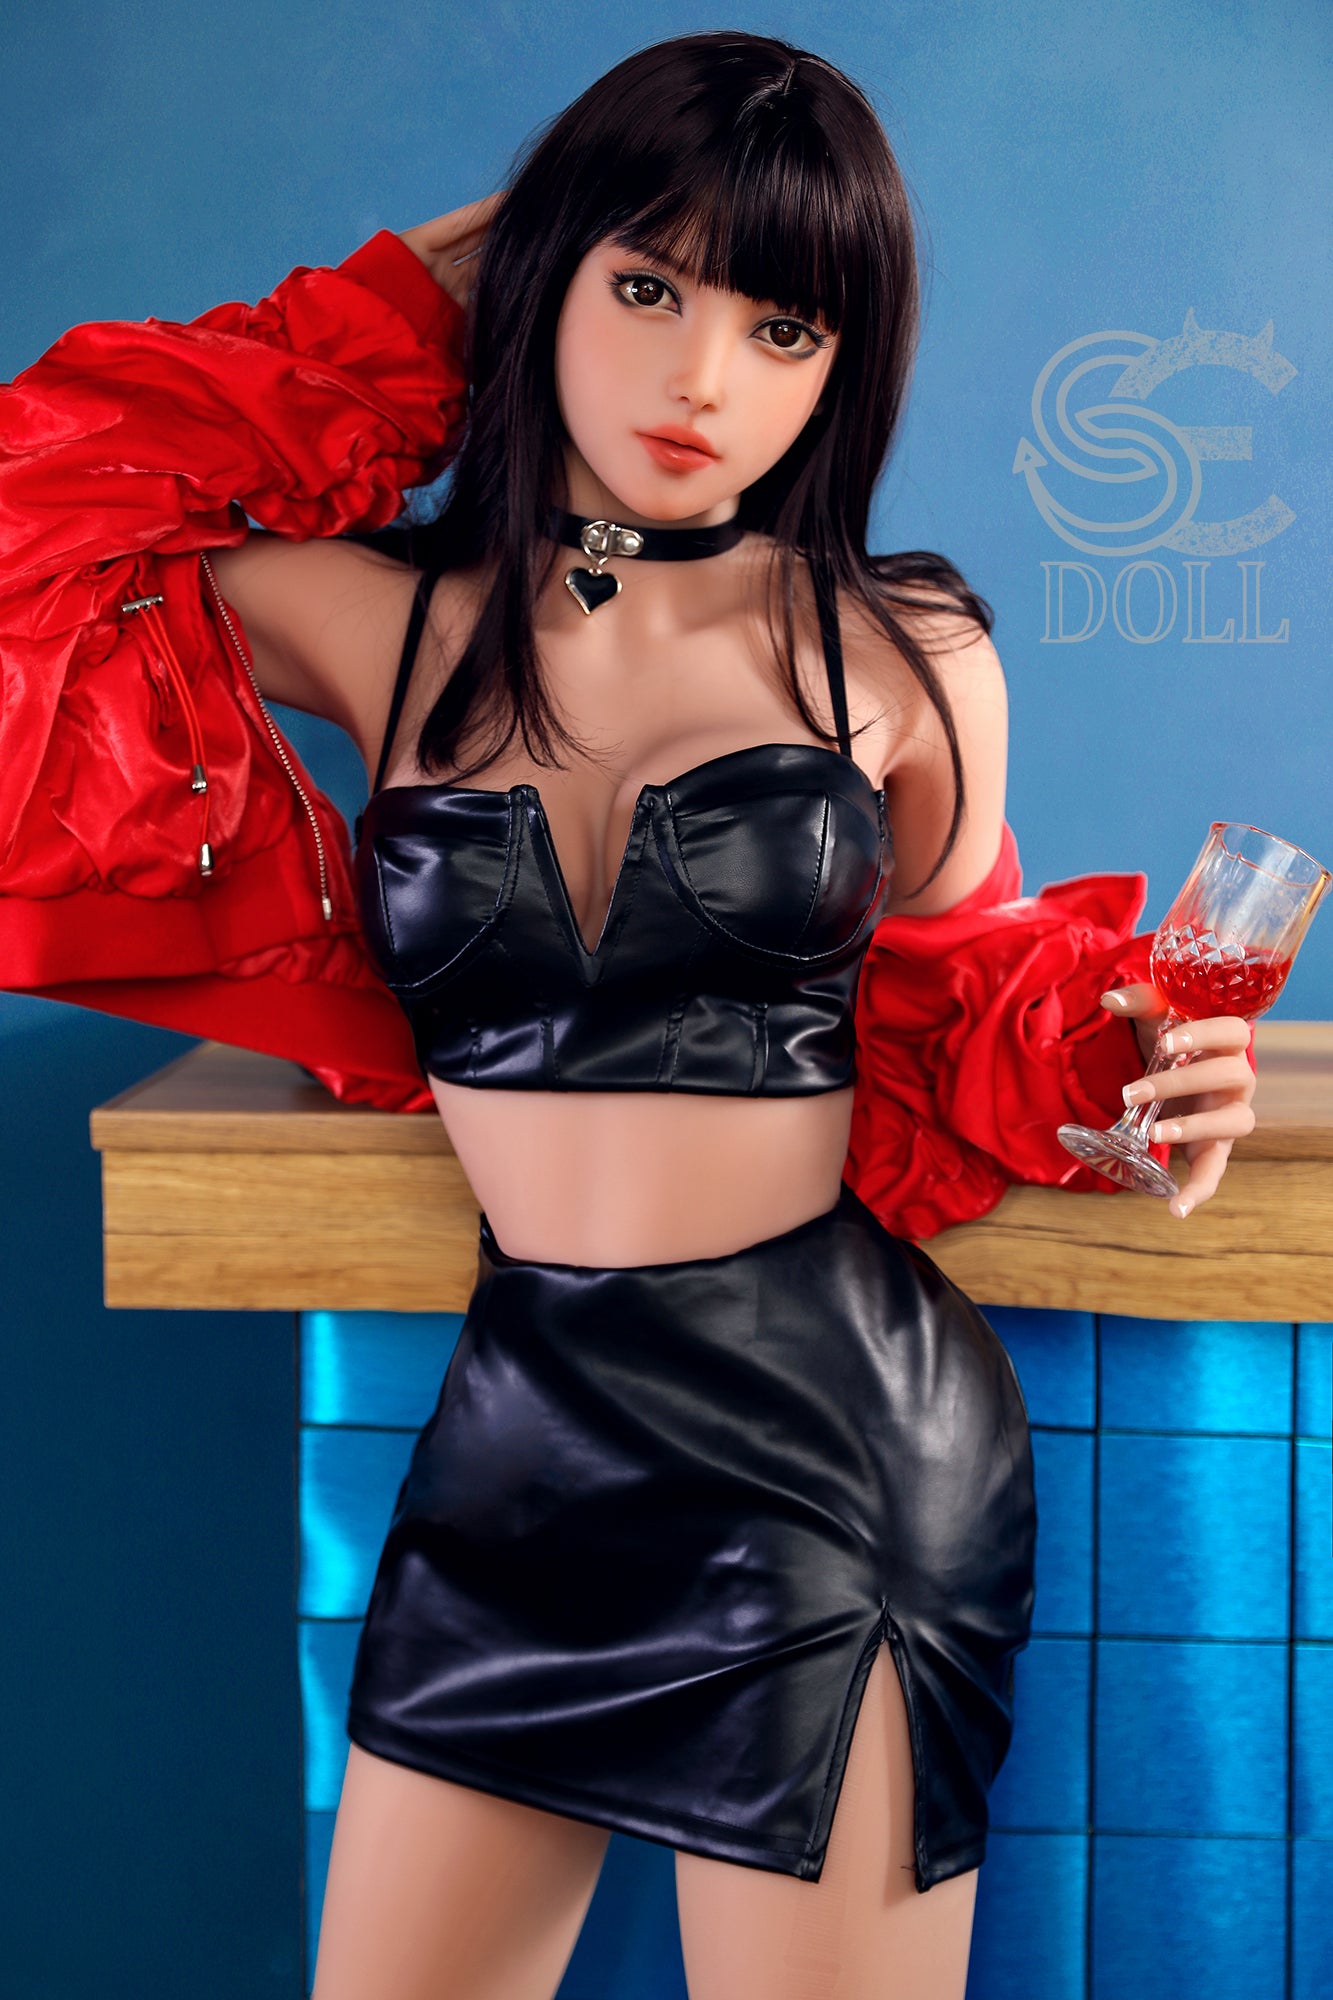 Coral: SEDOLL Asian Sex Doll